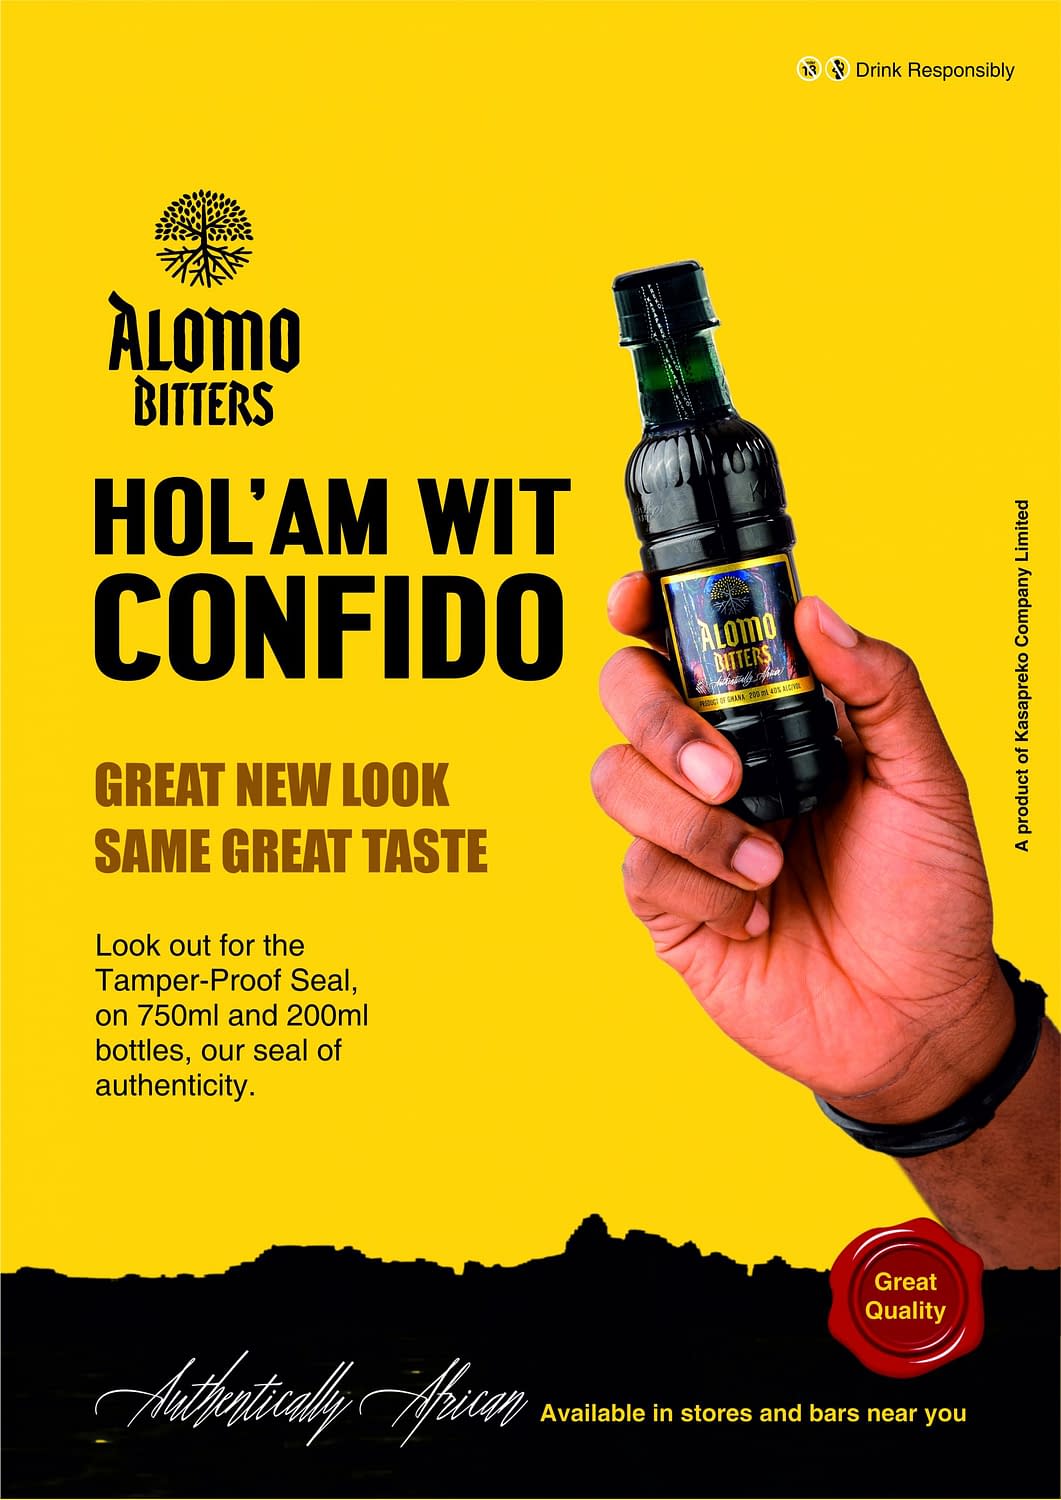 Hand holding Alomo Bitters drink